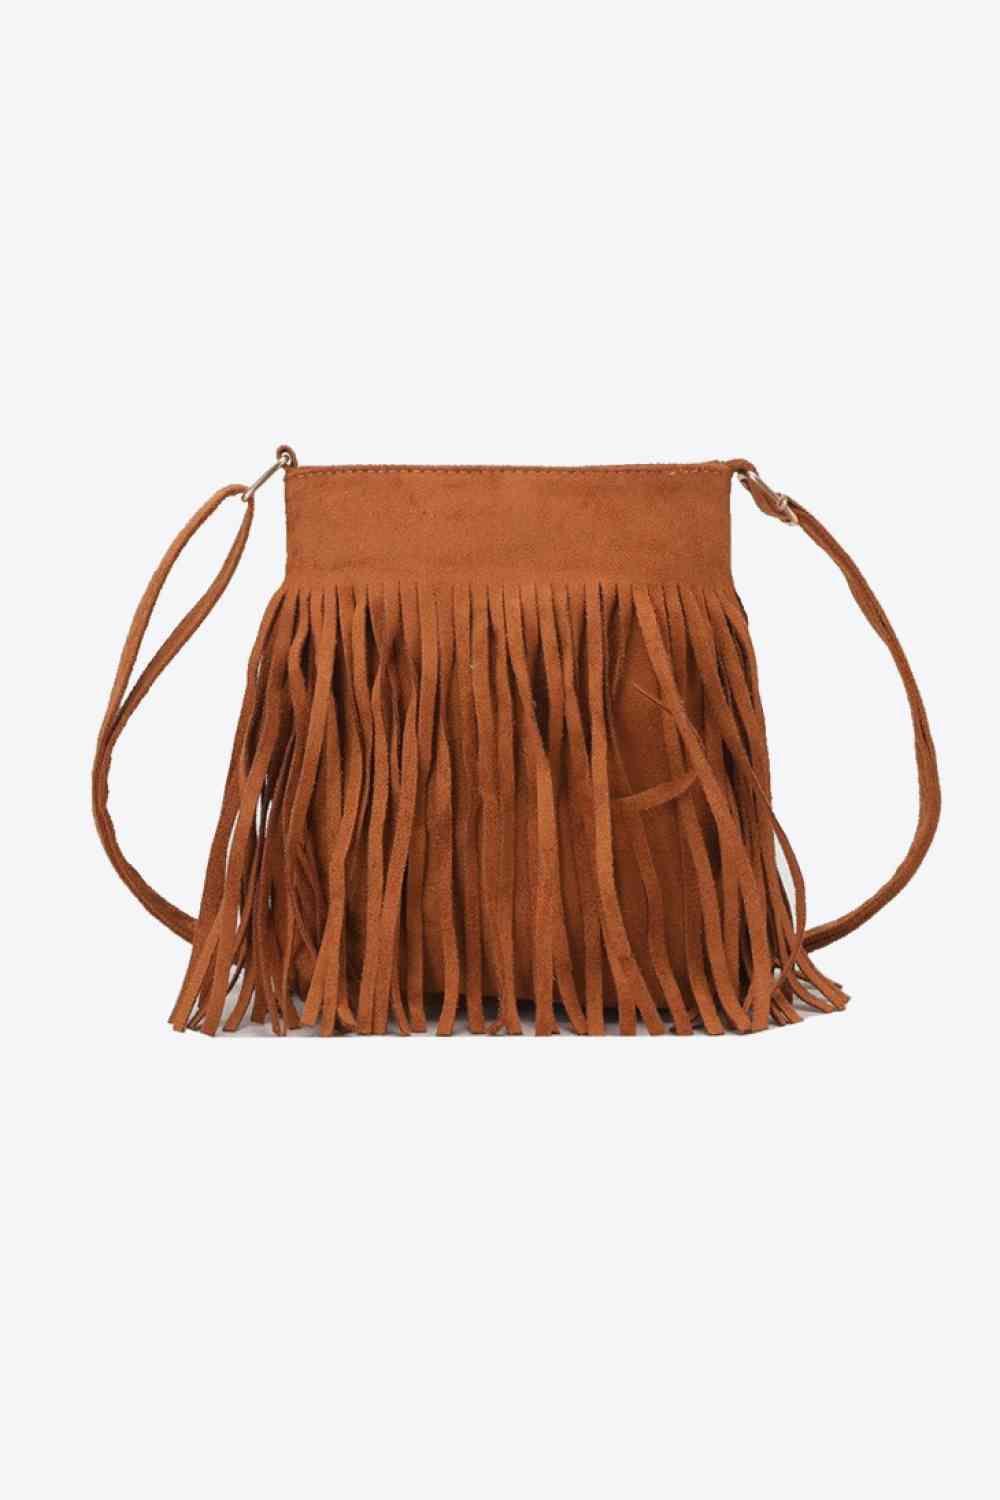 Adored PU Leather Crossbody Bag with Fringe Ochre One Size